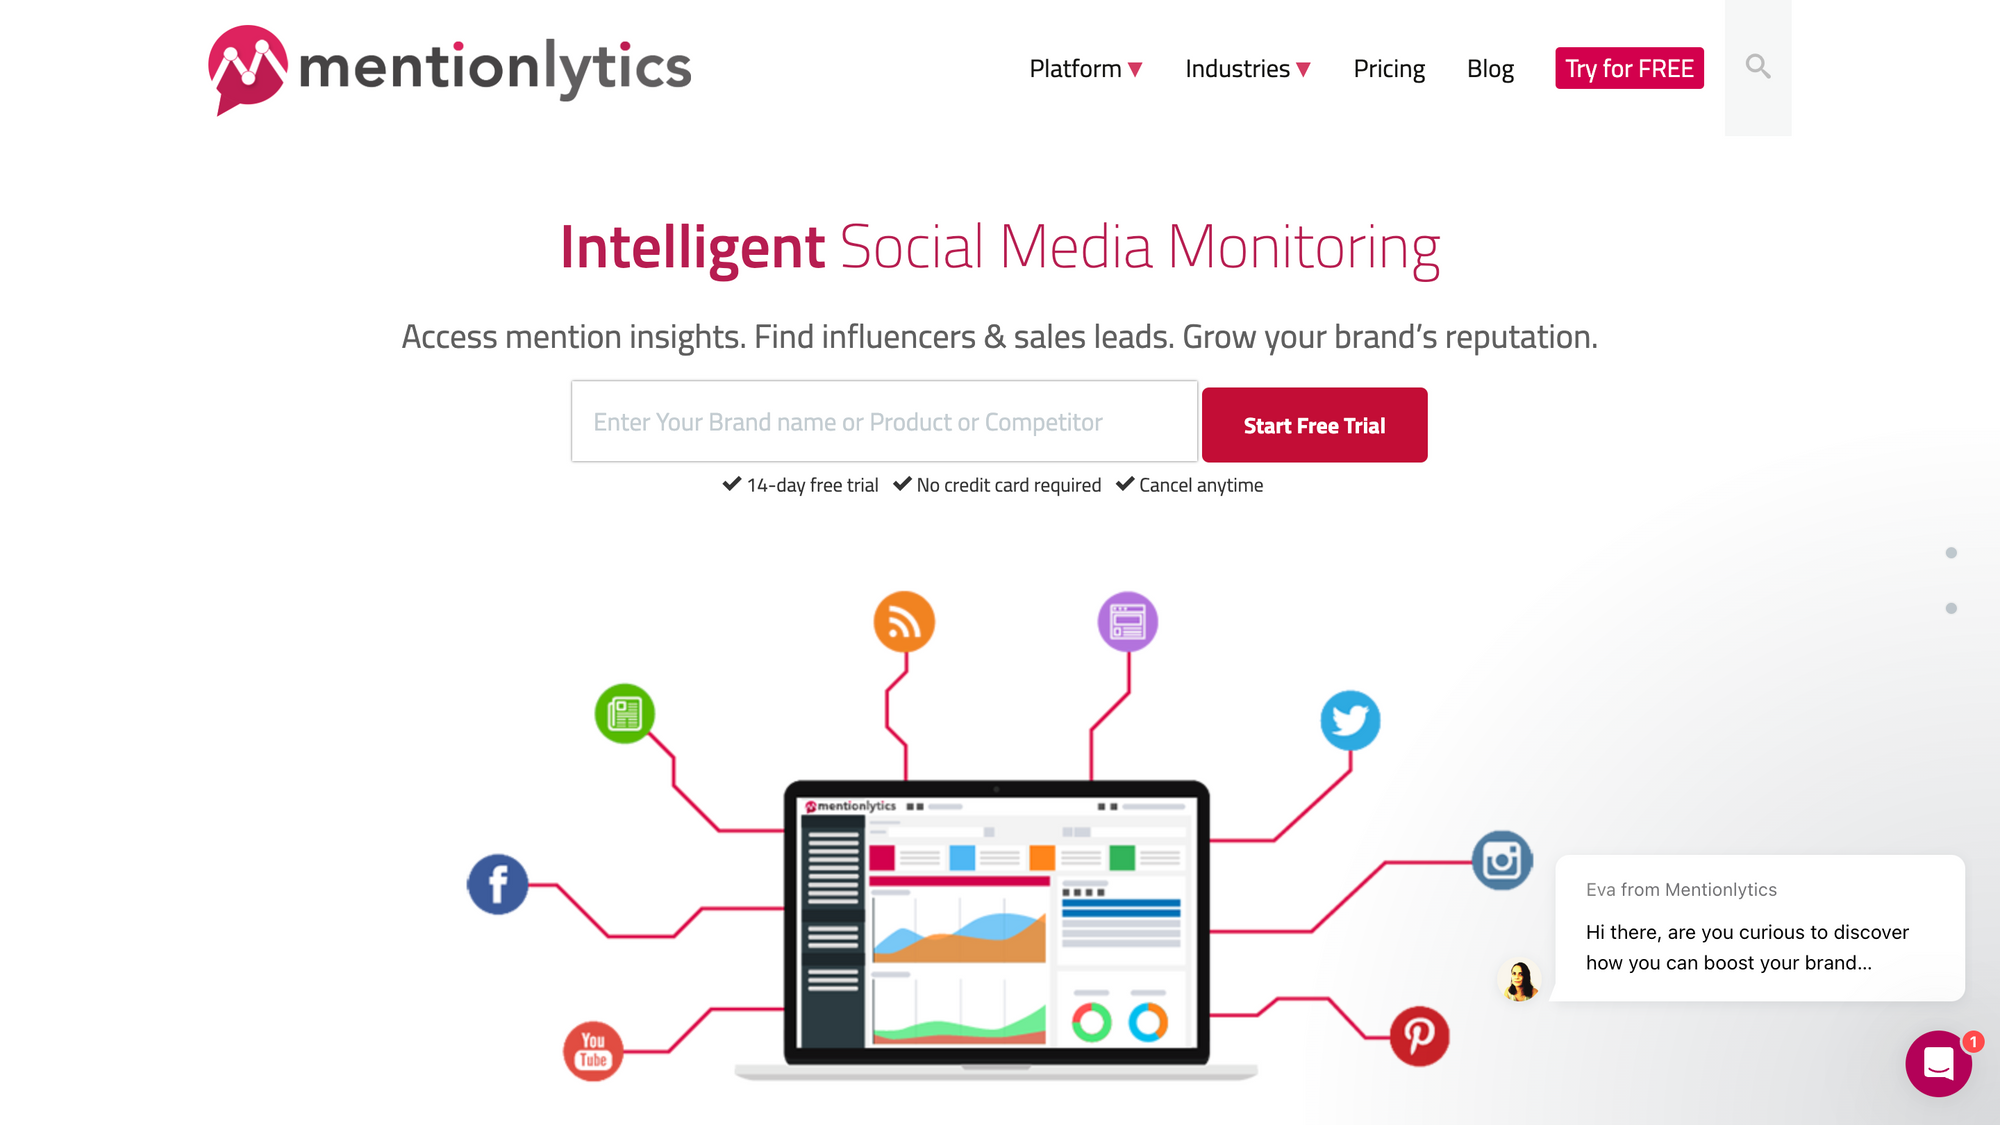 screenshot from the main page of mentionlytics